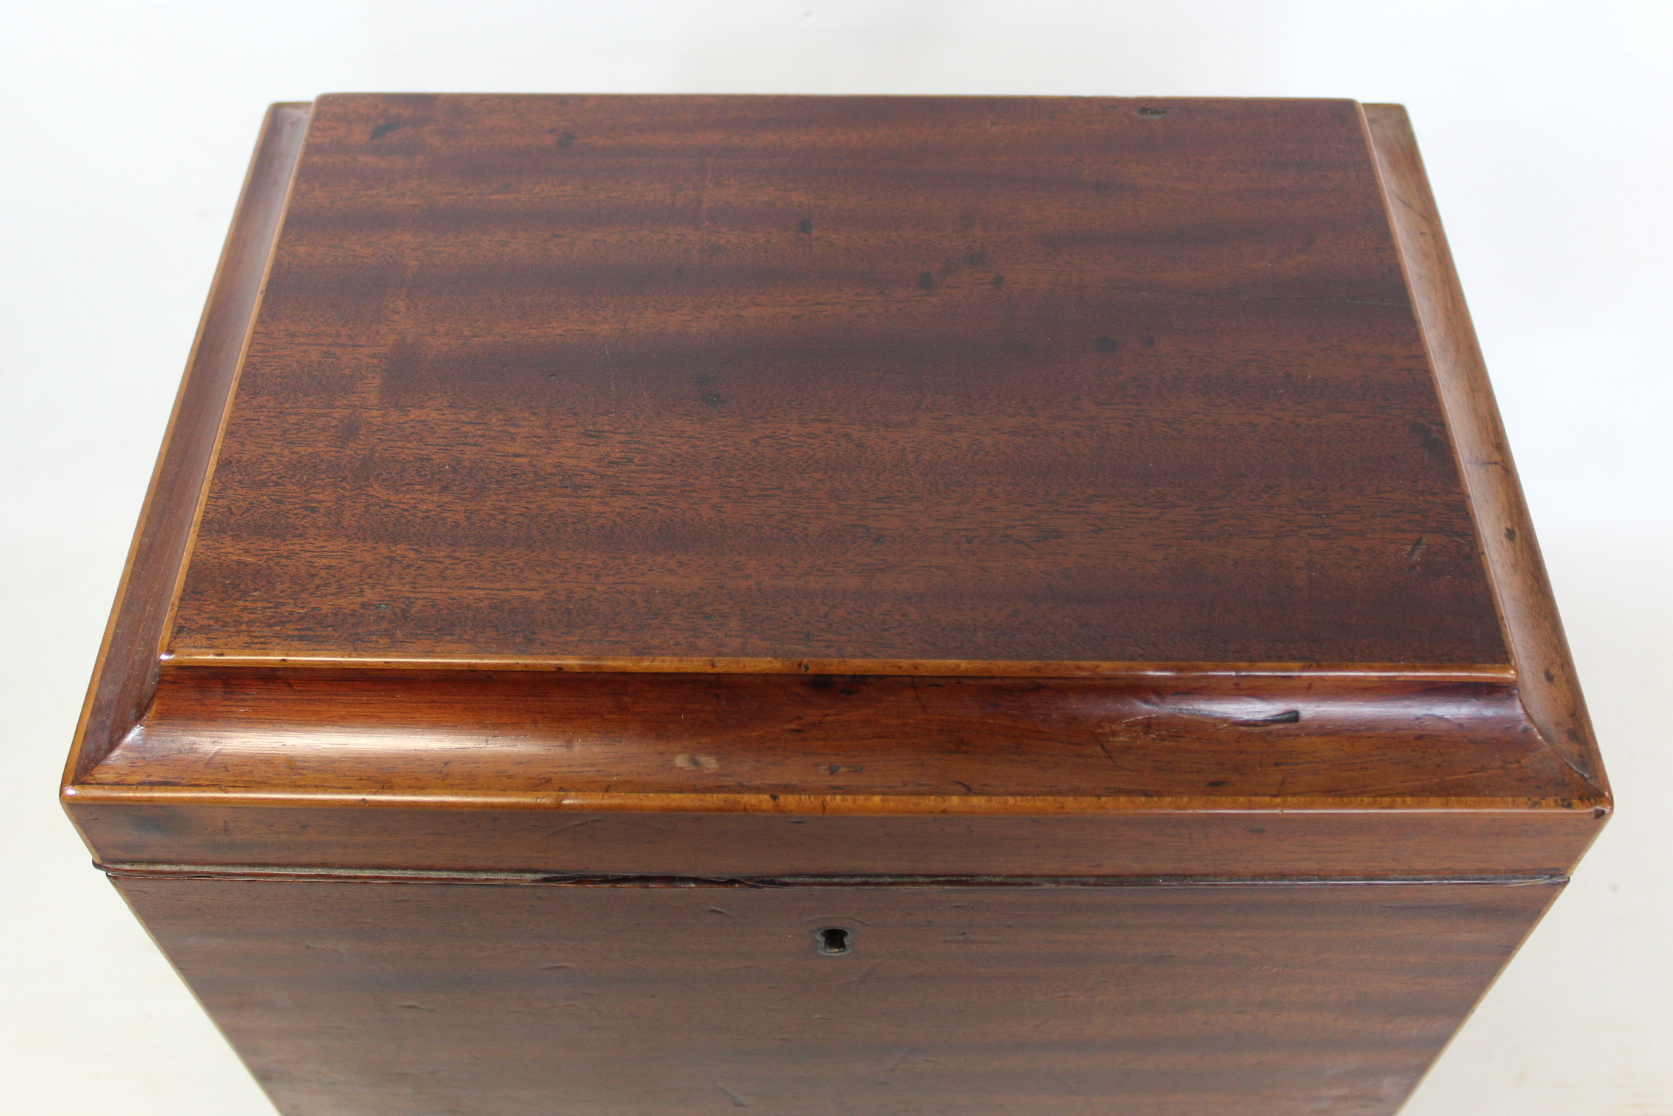 19th century travelling decanter set, the rectangular mahogany box with twin brass carrying handles, - Image 7 of 12